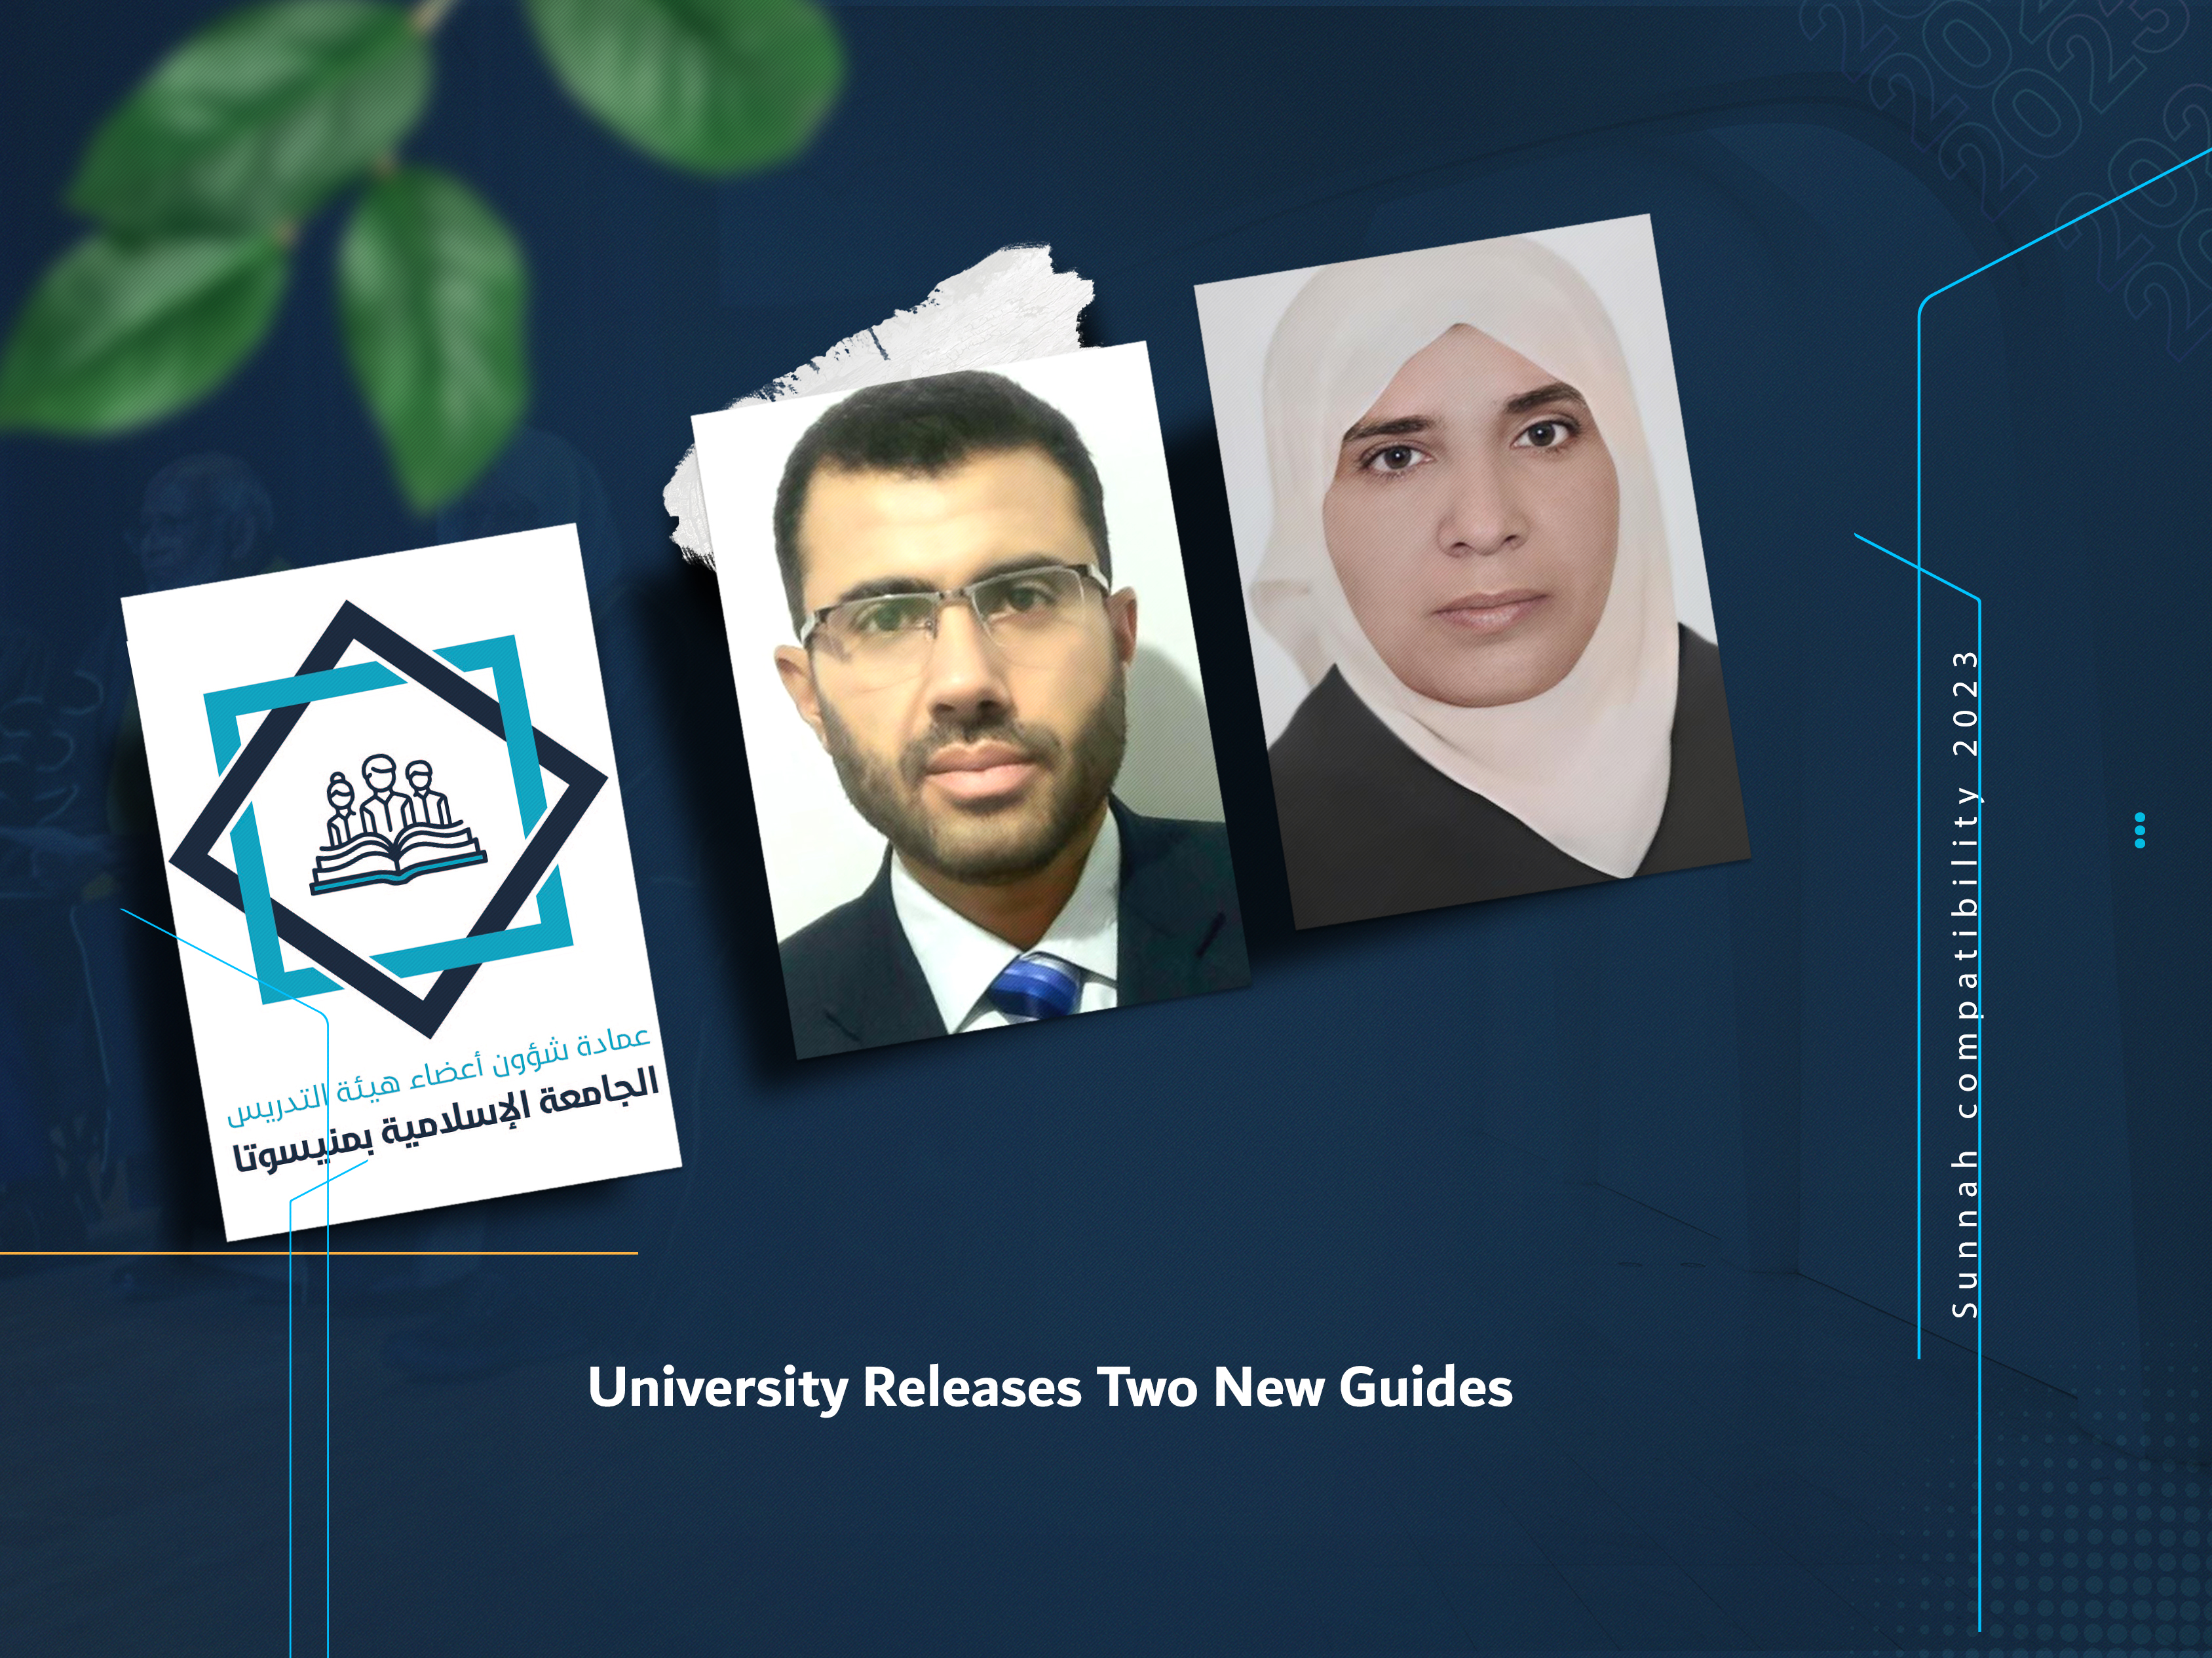 University Releases Two New Guides